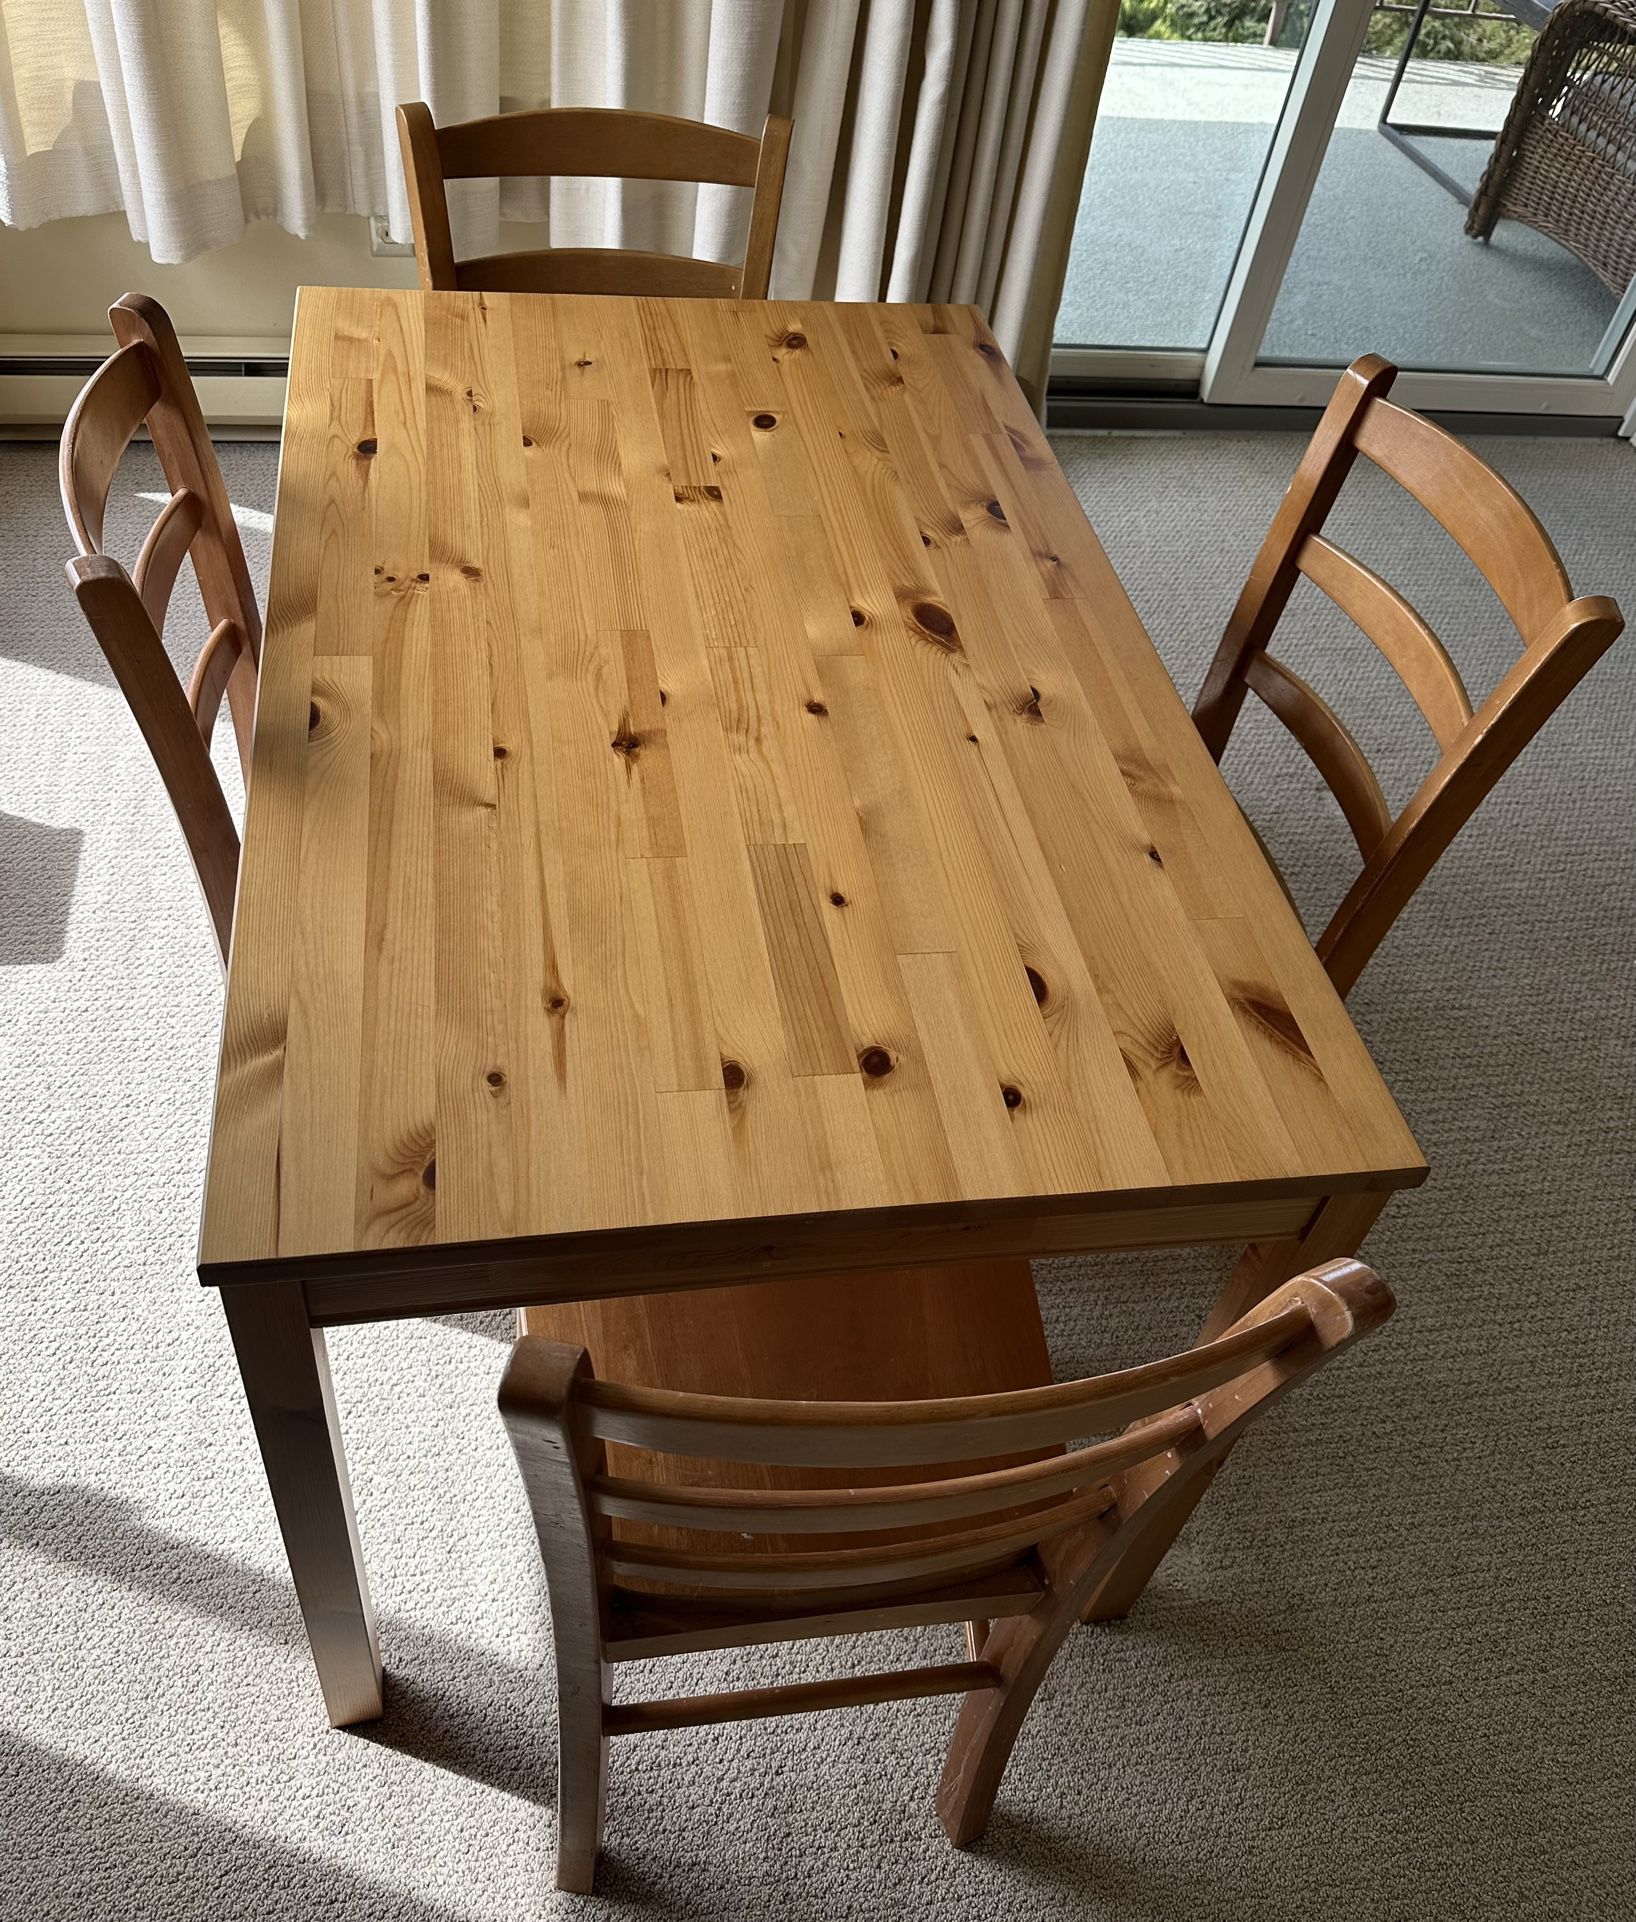 Wooden Dining Table With 4 Chairs 